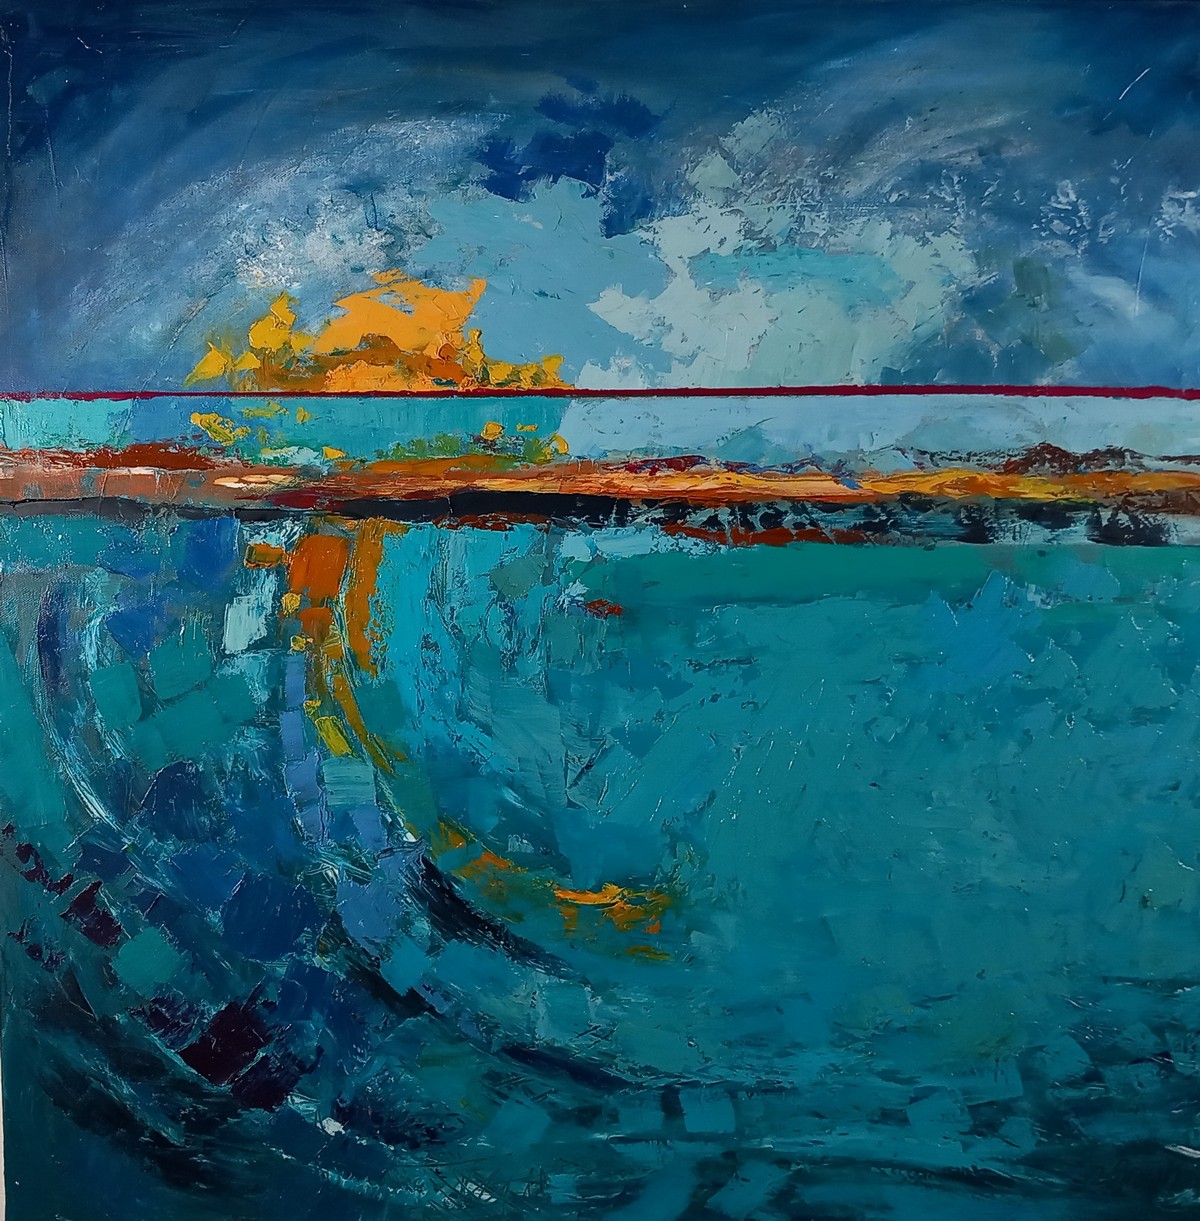 R BROWN (British 20th / 21st Century) Horizon, Oil on canvas, Signed lower right, 31.5” x 31.5” (